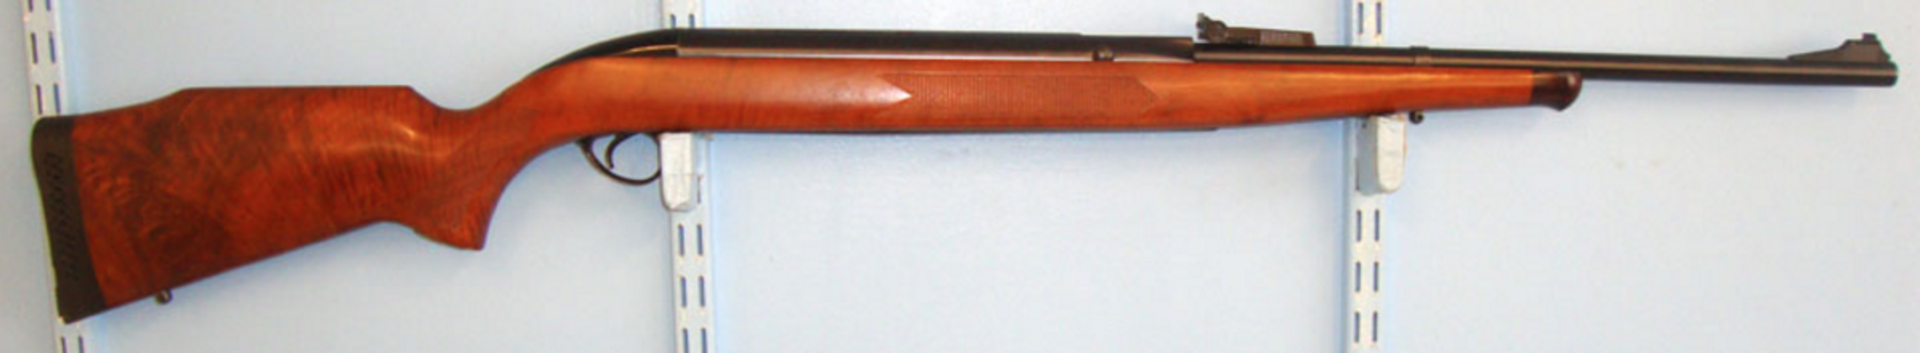 MINT, BSA Airsporter ‘BSA Piled Arms Centenary 1982 One Of One Thousand’, Commemorative Air Rifle - Image 3 of 3